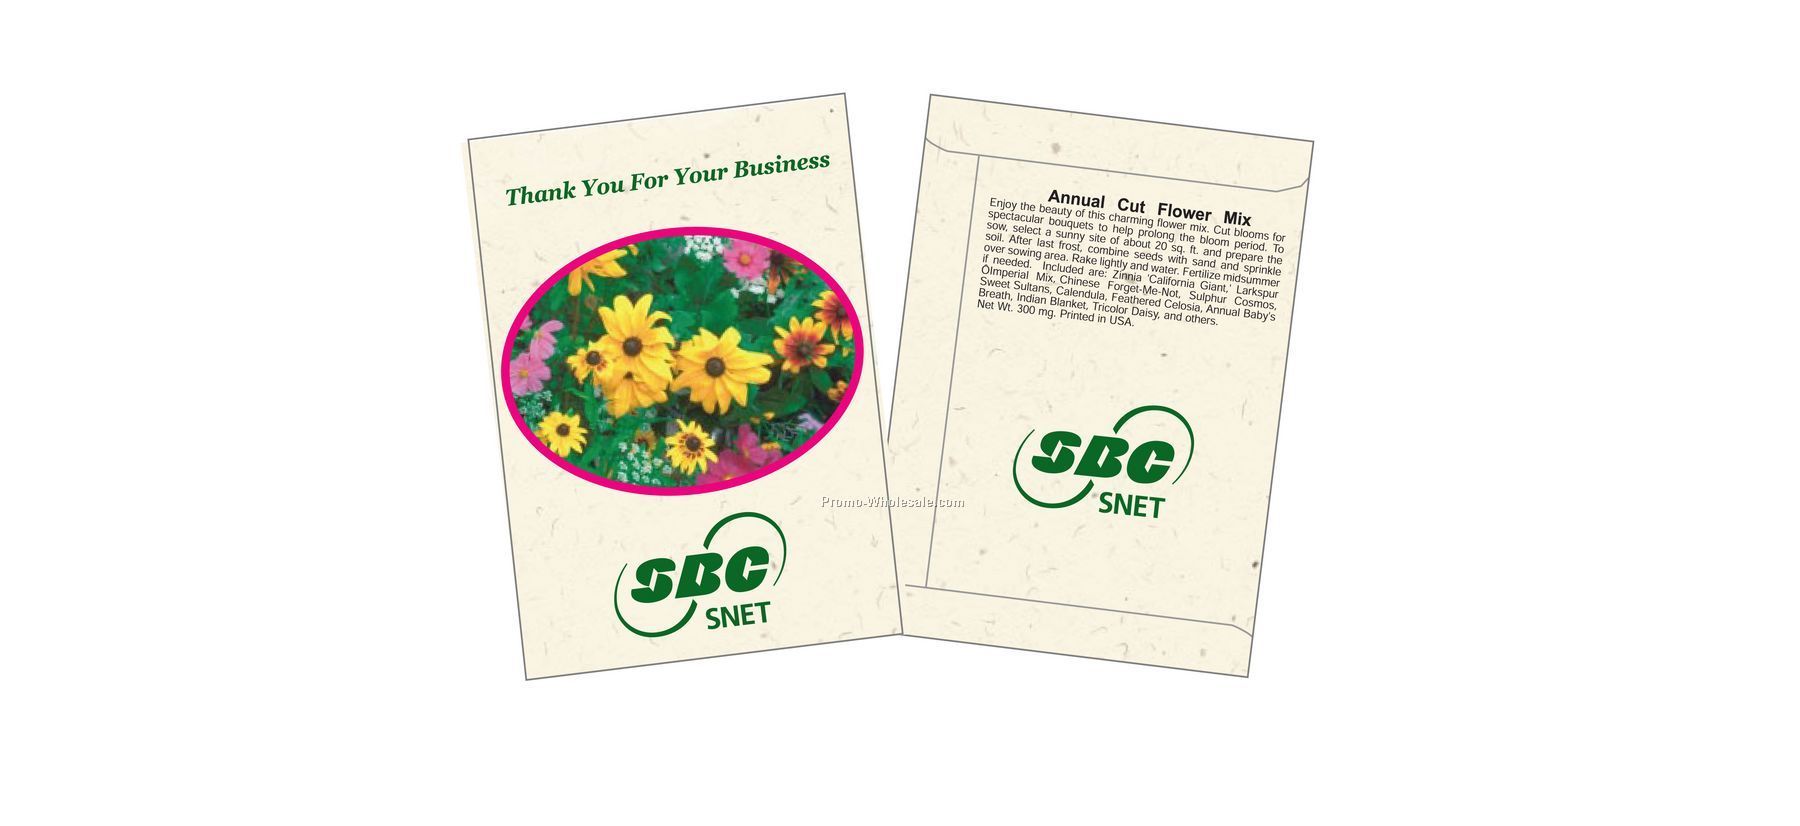 3-1/4"x4-1/2" Annual Cut Flower Mixture Seed Packet (1 Color)